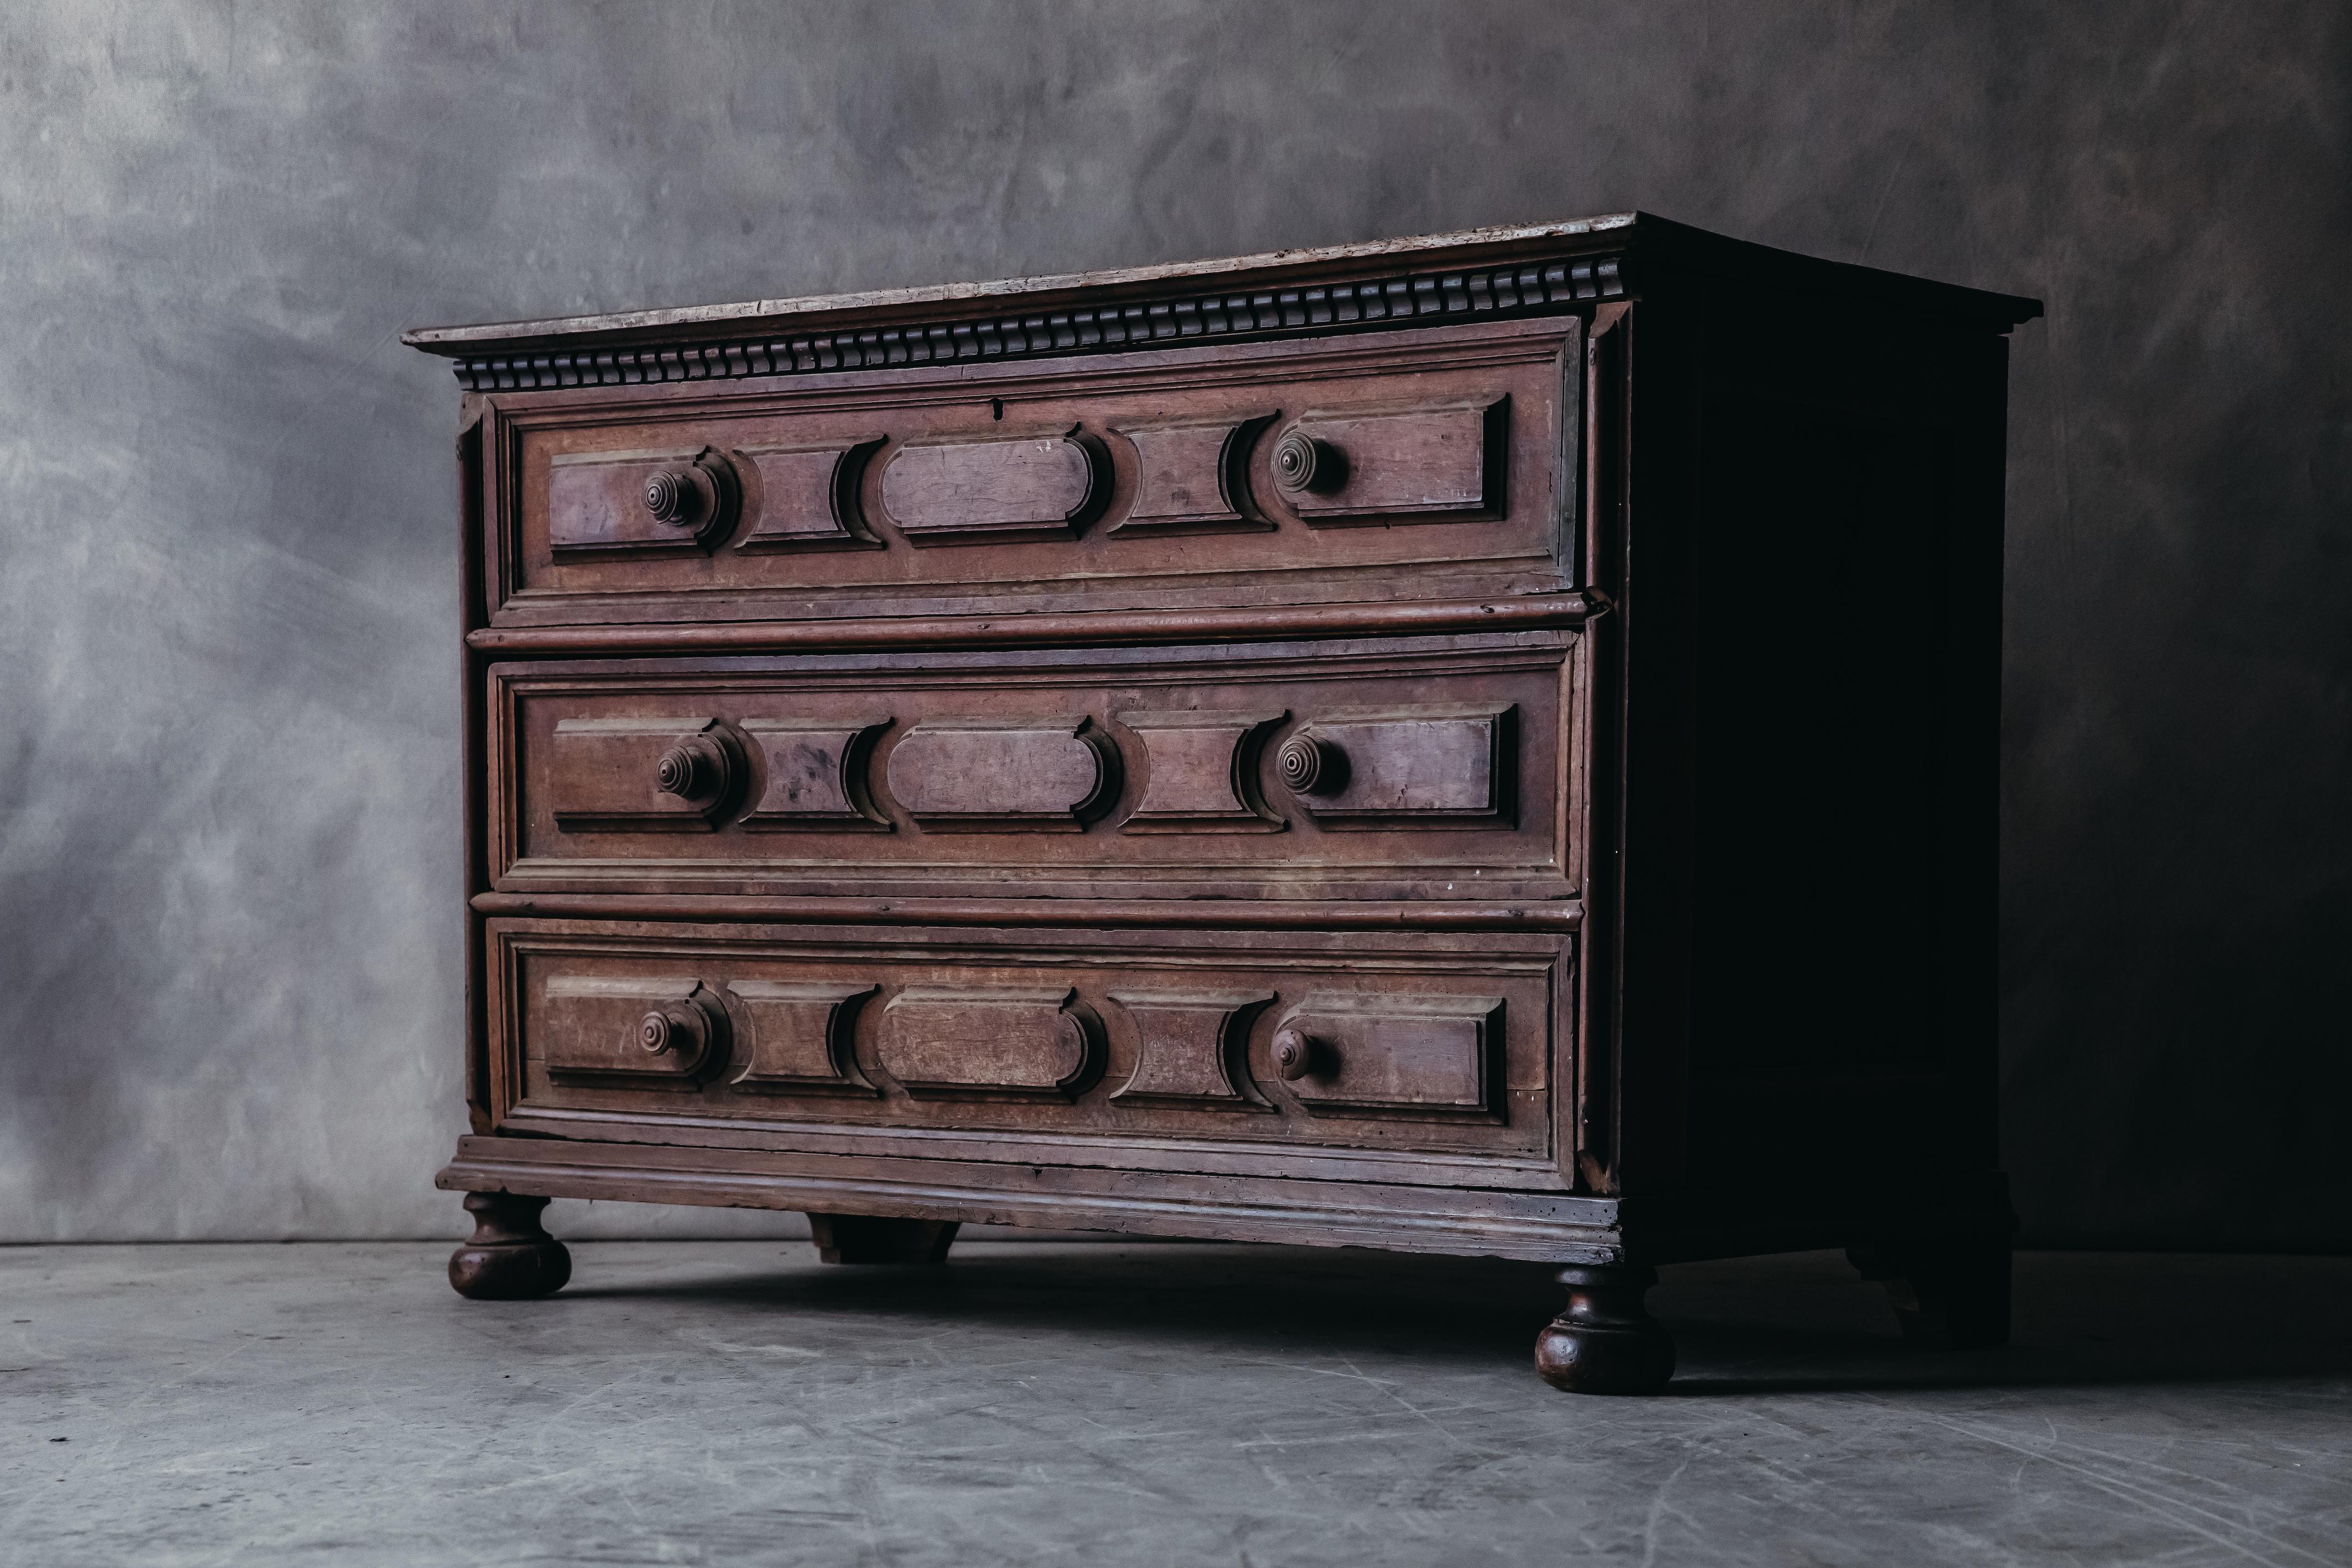 Early Walnut Chest Of Drawers From Italy, circa 1800. Solid walnut construction with hand turned handles and detail. Amazing patina.